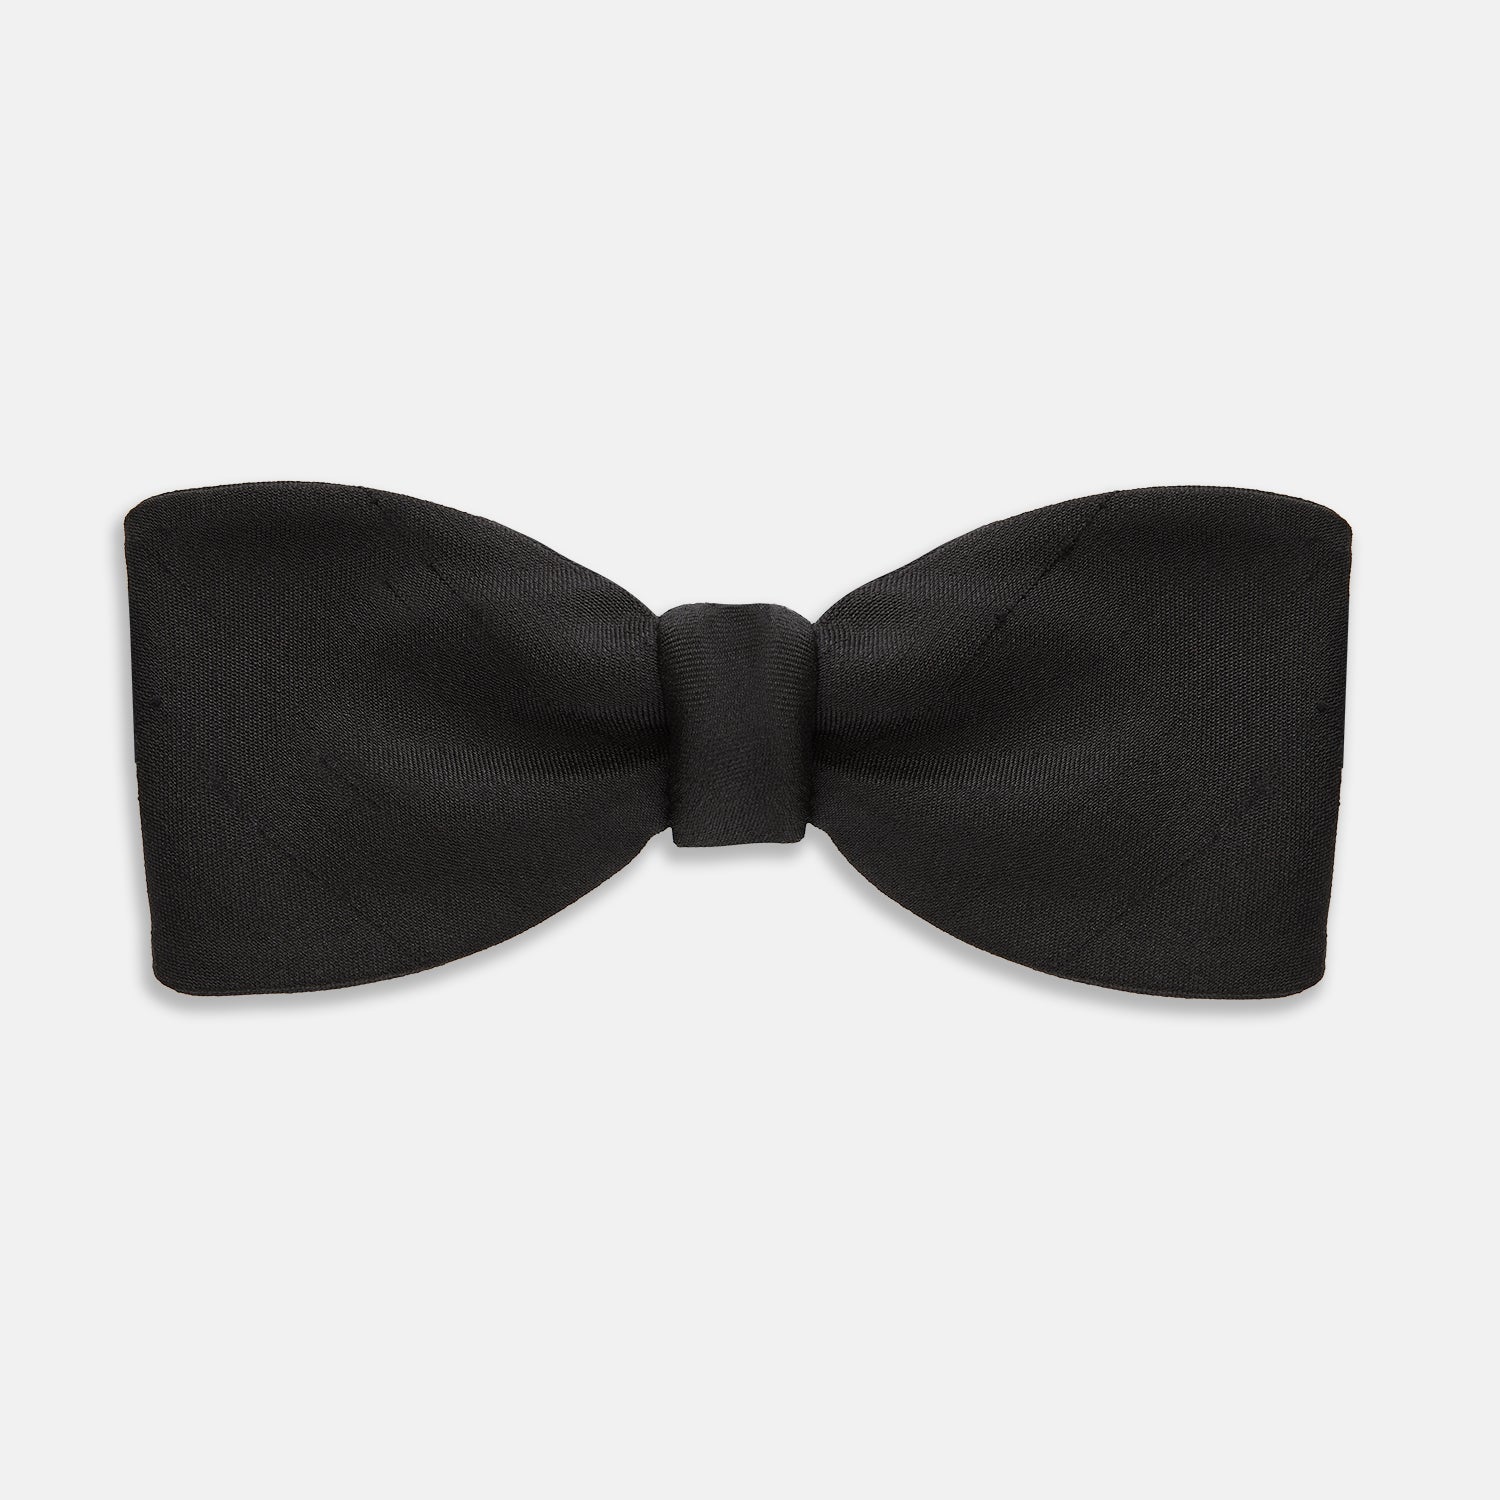 Casino Royale Bow Tie As Seen On James Bond